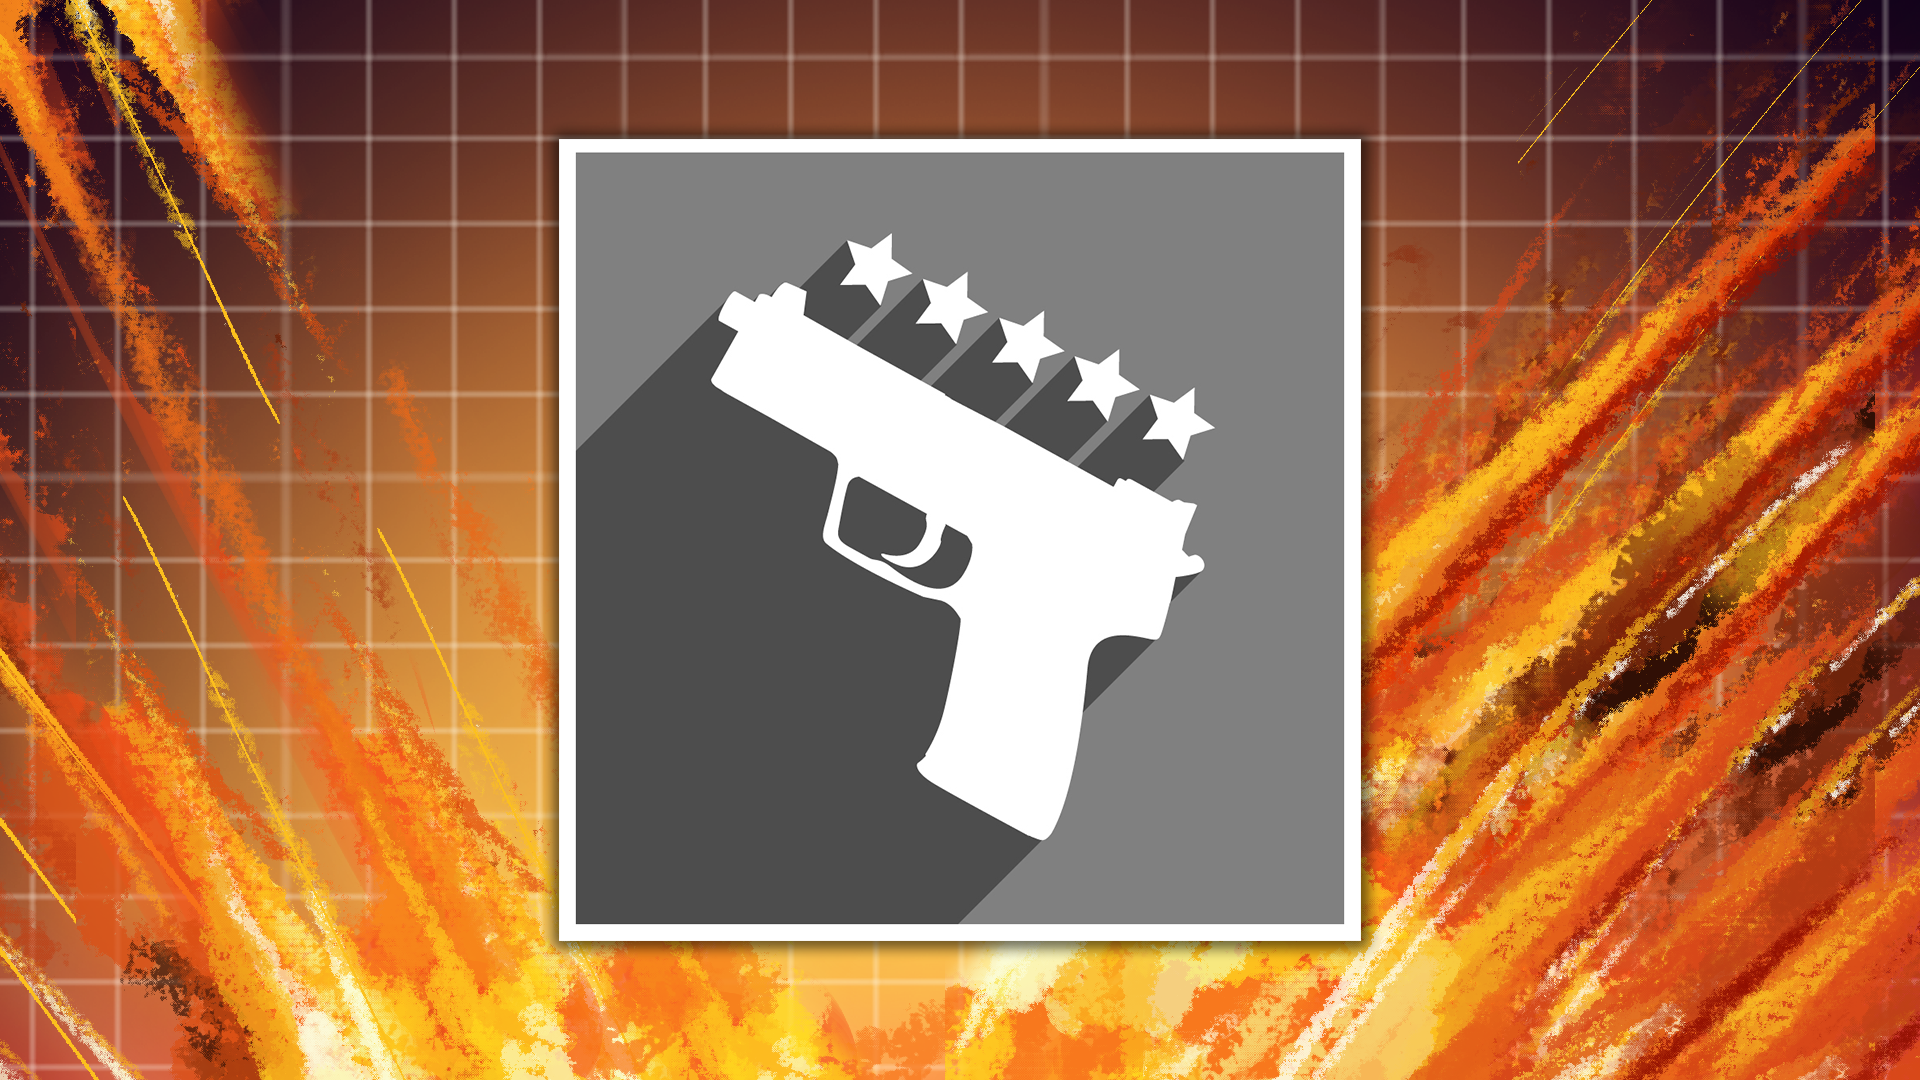 Icon for Lock n' Load!